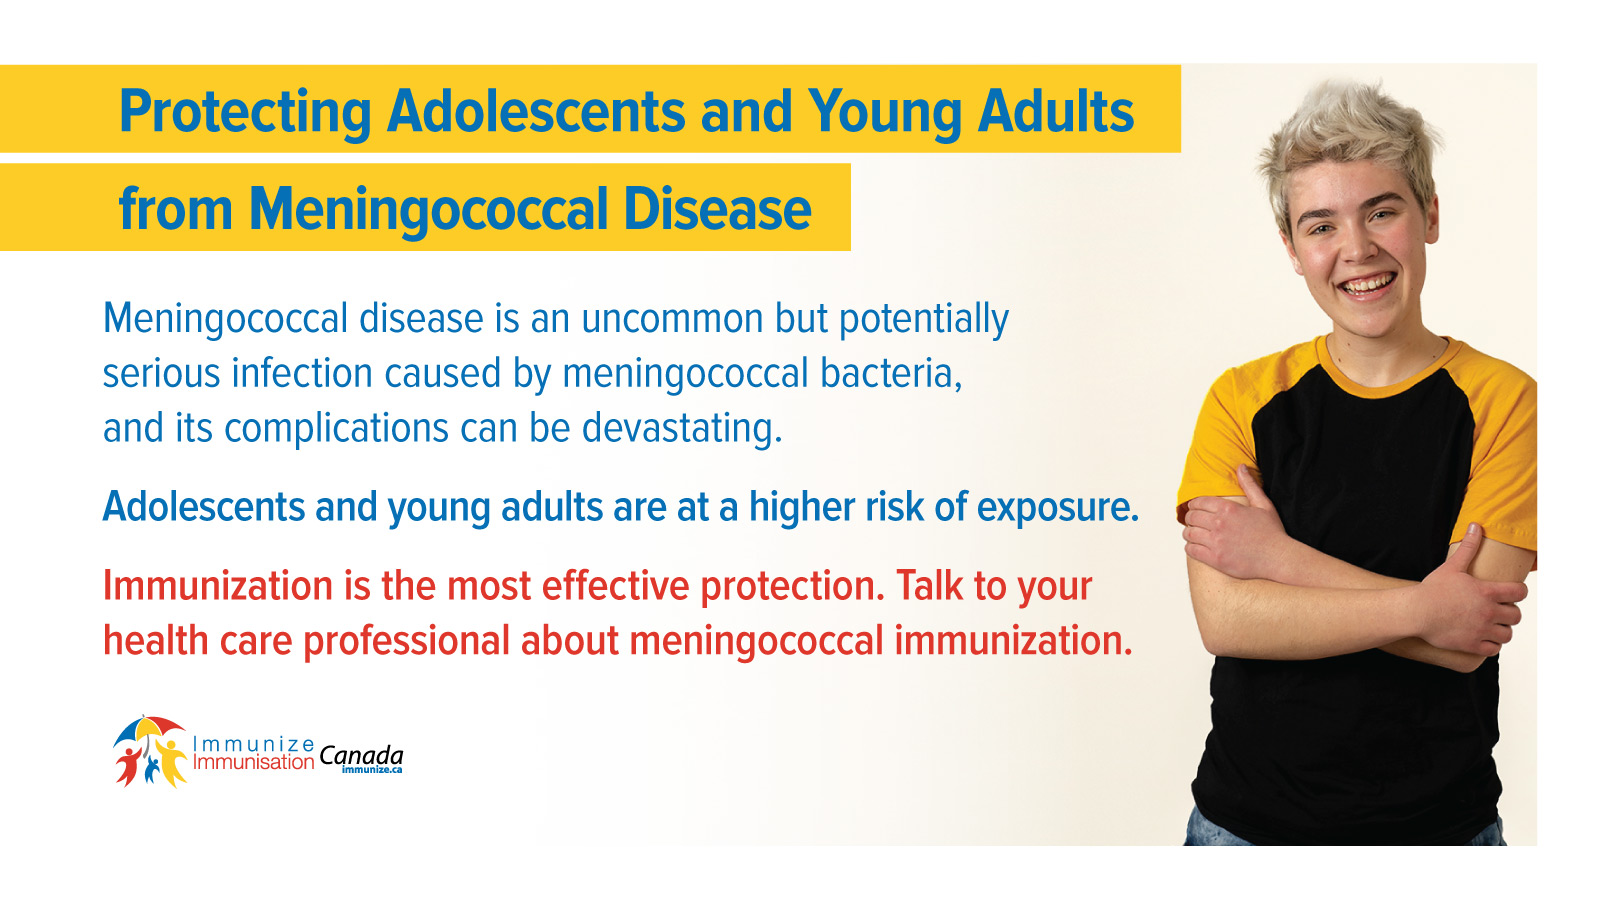 Protecting Adolescents and Young Adults from Meningococcal Disease - image 2 for Twitter